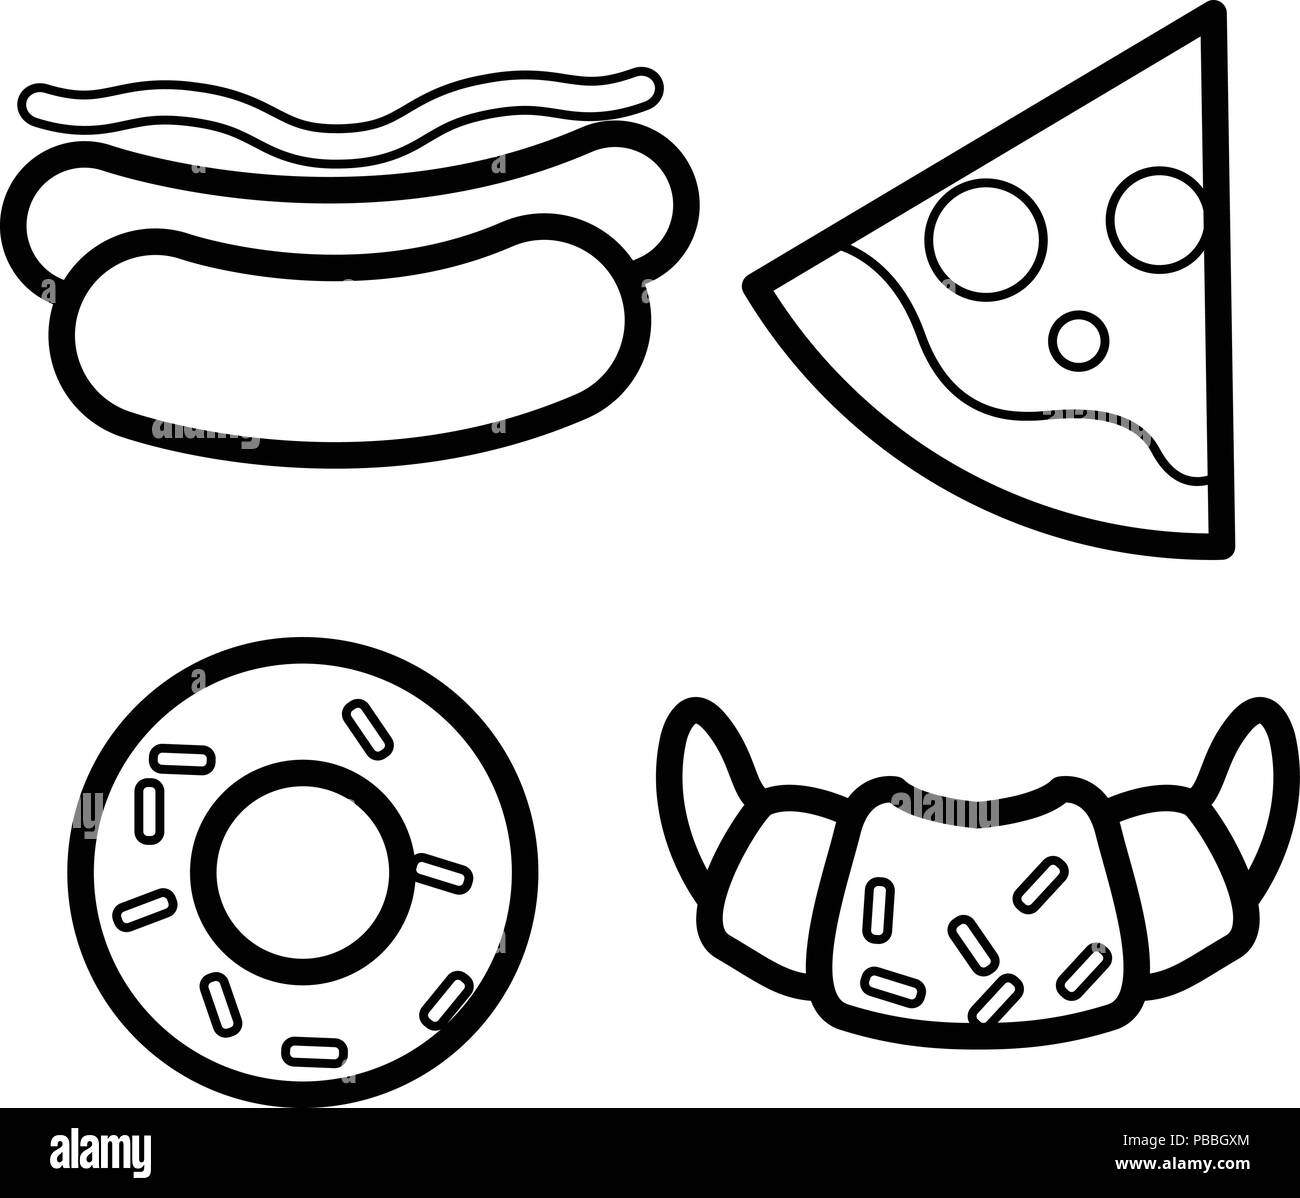 Fast food Icons - Hot Dog, Pizza, Croissant, Donut Stock Vektor